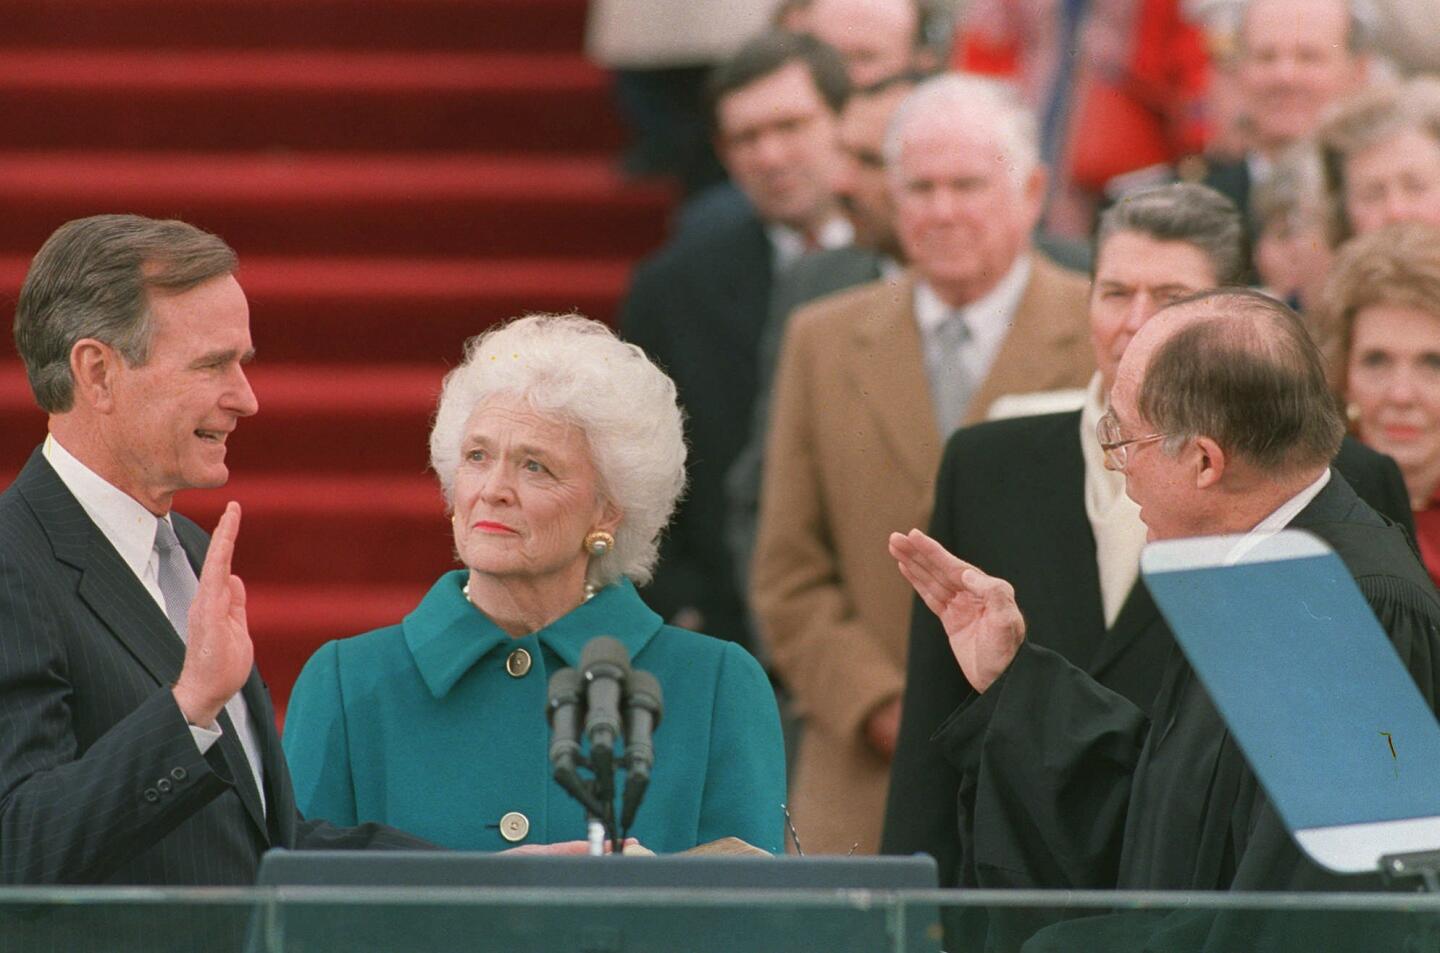 1989: George Herbert Walker Bush takes office, becoming the preppiest occupant of the Oval Office since JFK, although, by failing to make the gin and tonic the national libation, he stops short of completely pandering to the preppy constituency.